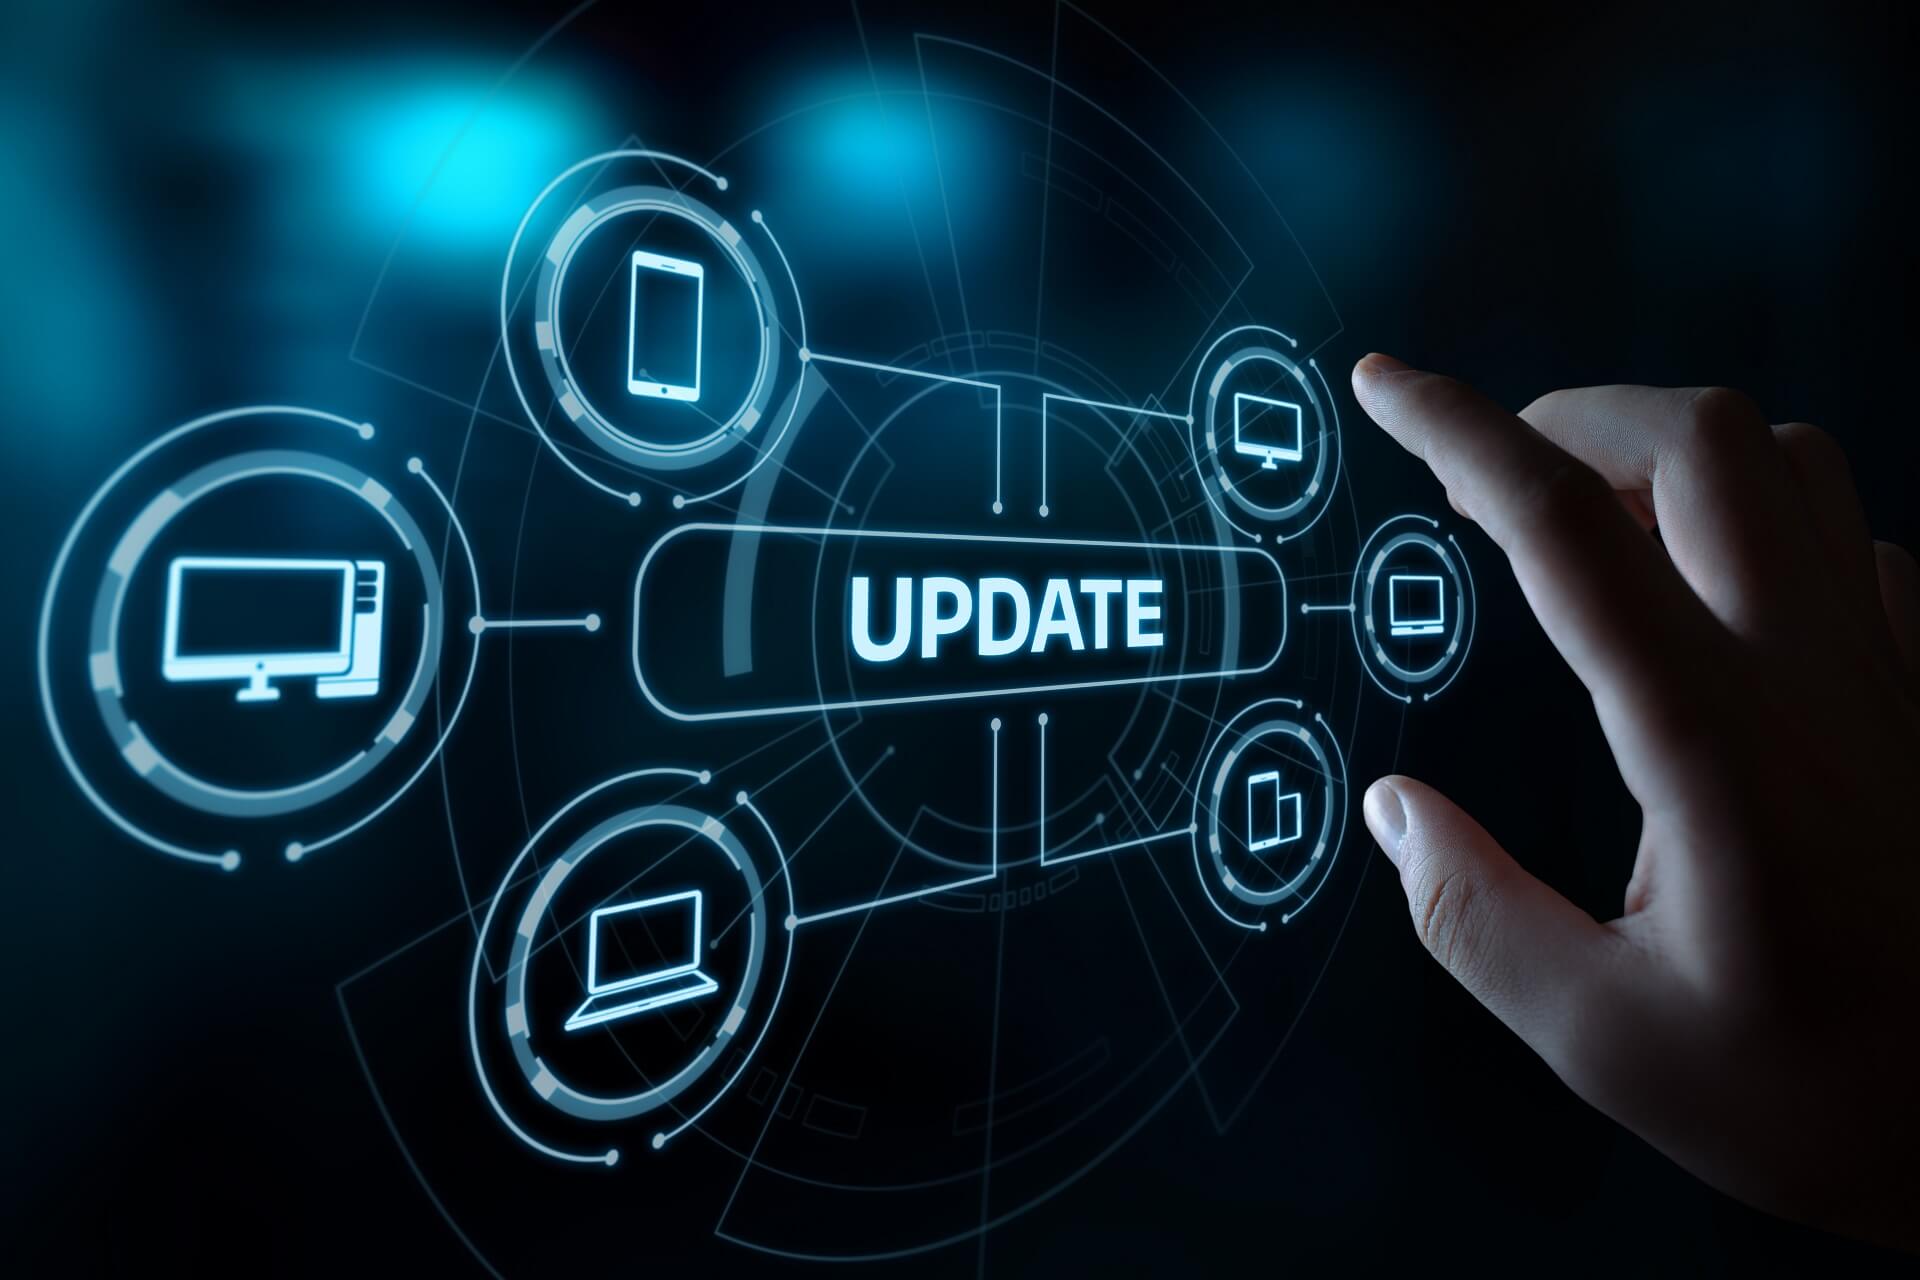 May patch tuesday updates